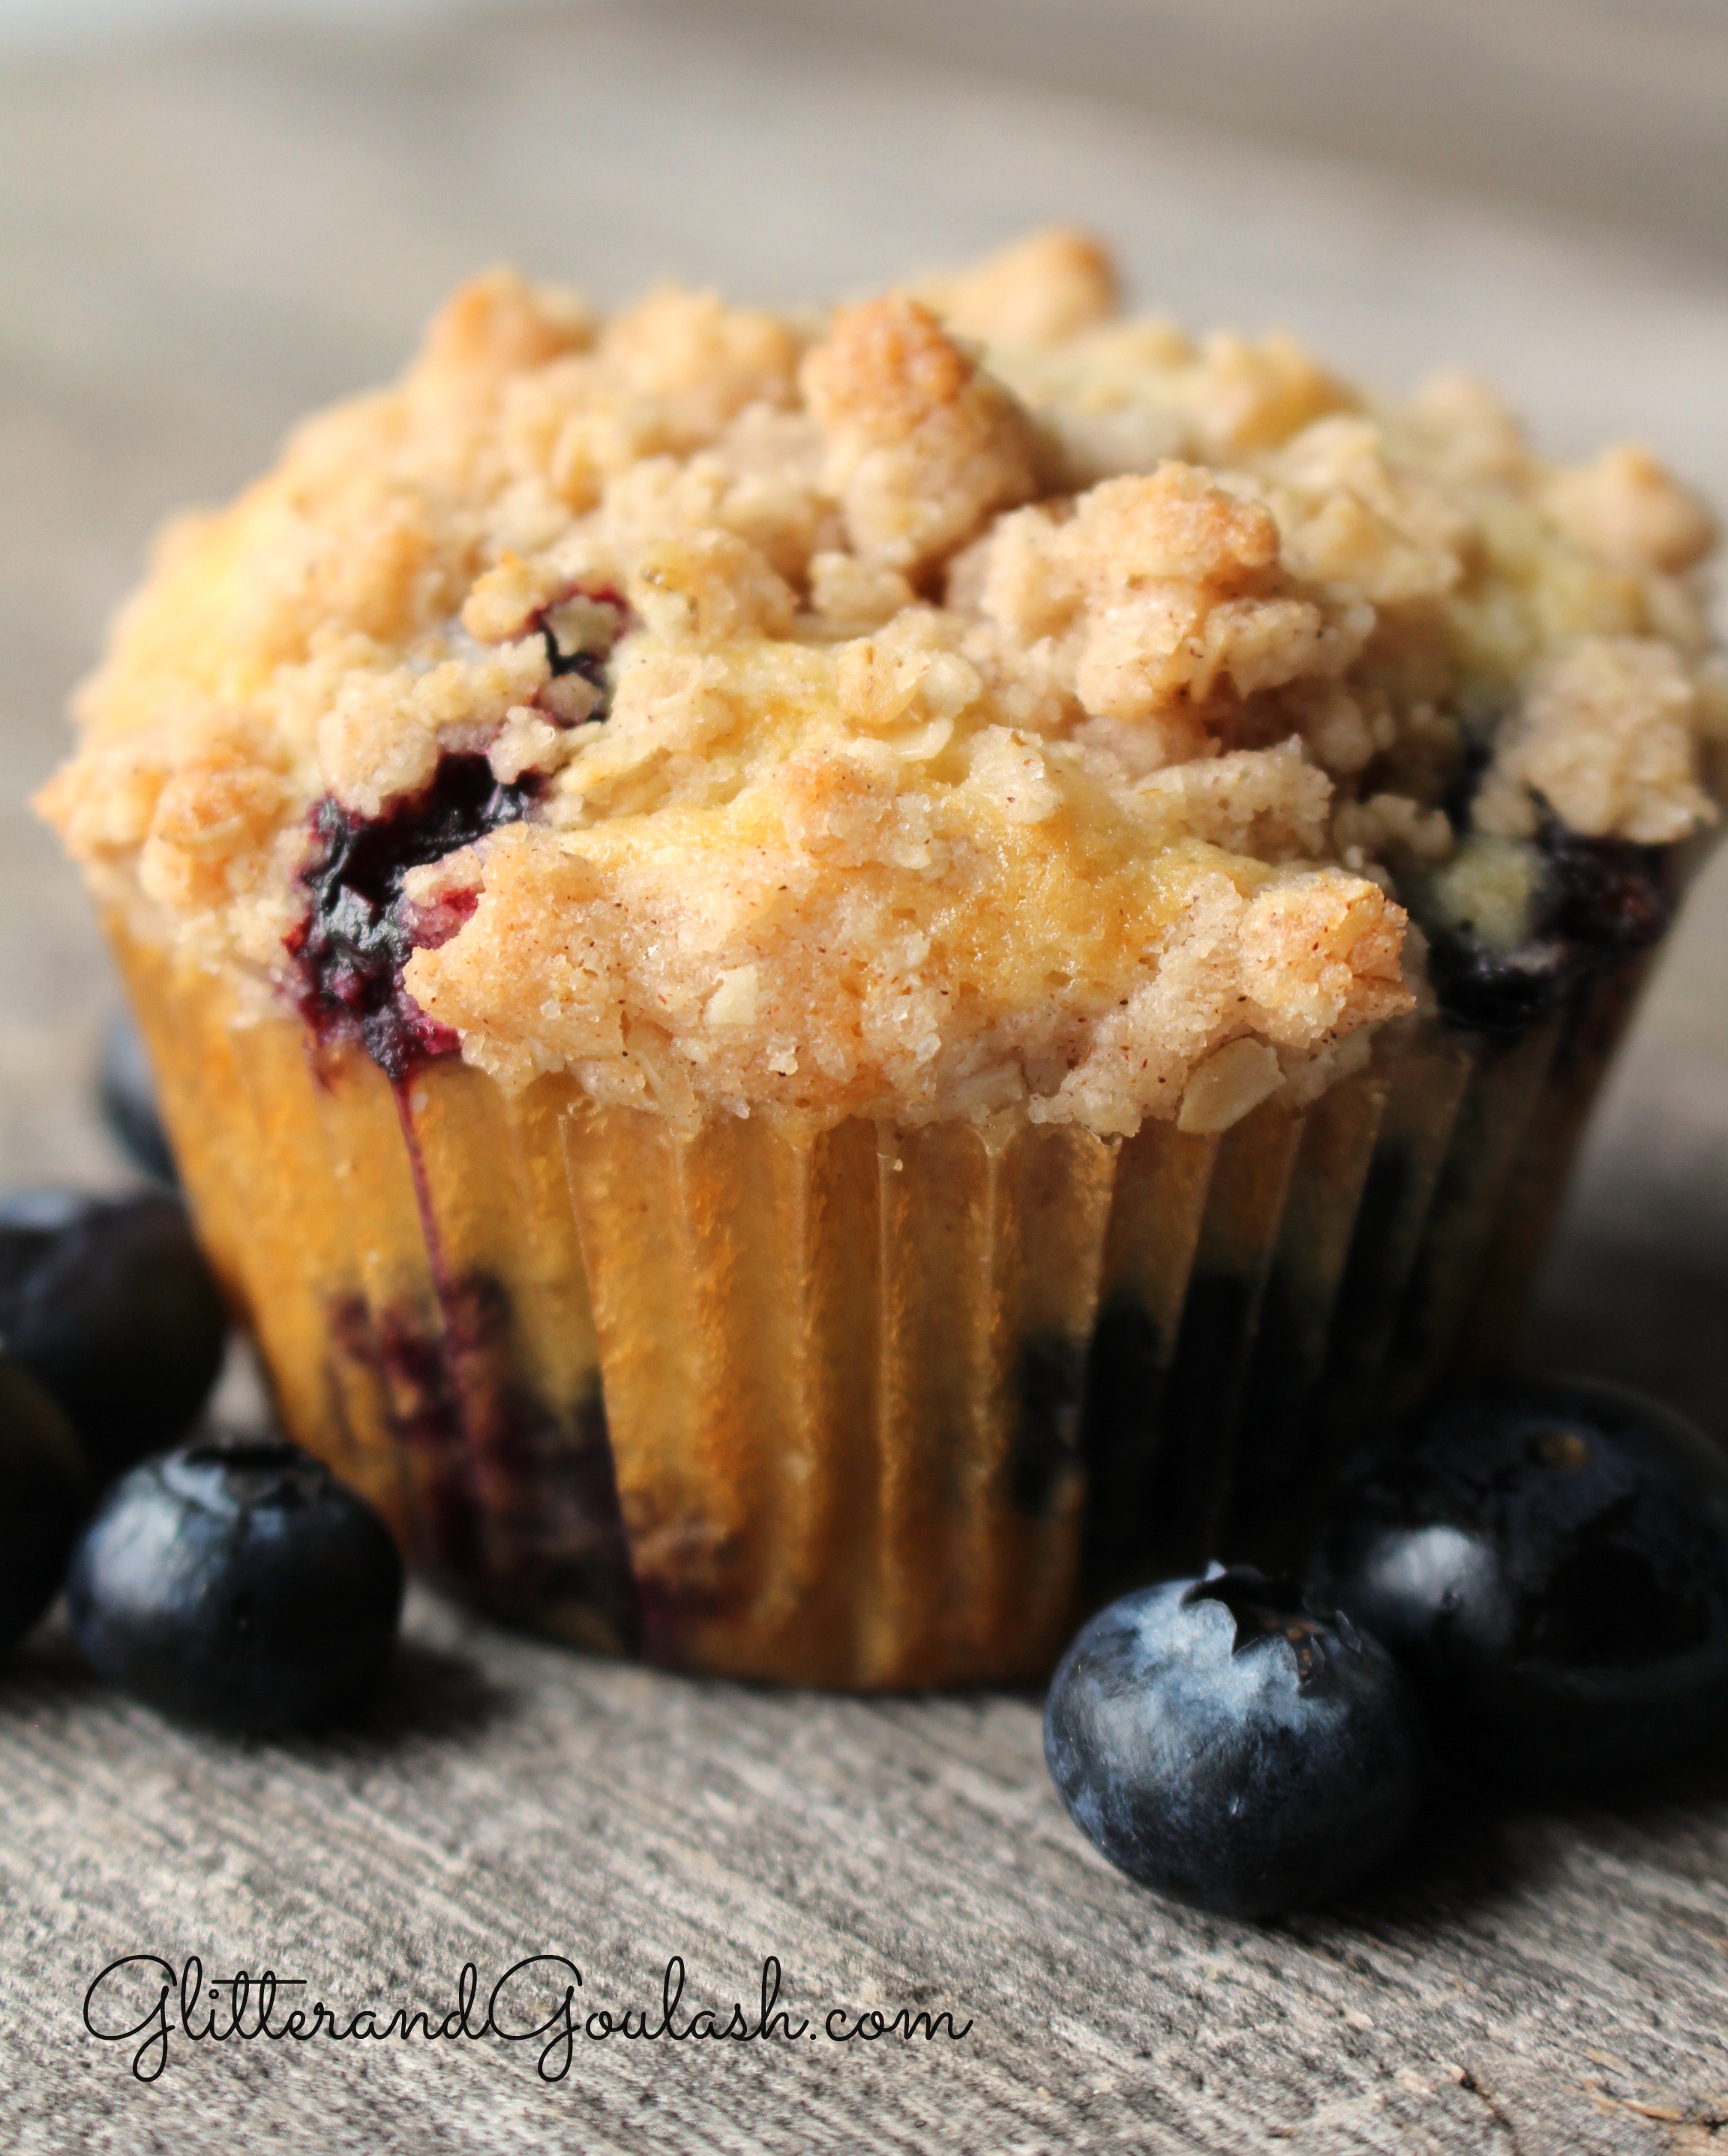 relæ Klage helbrede Streusel Topped Blueberry Muffin Recipe - Glitter and Goulash